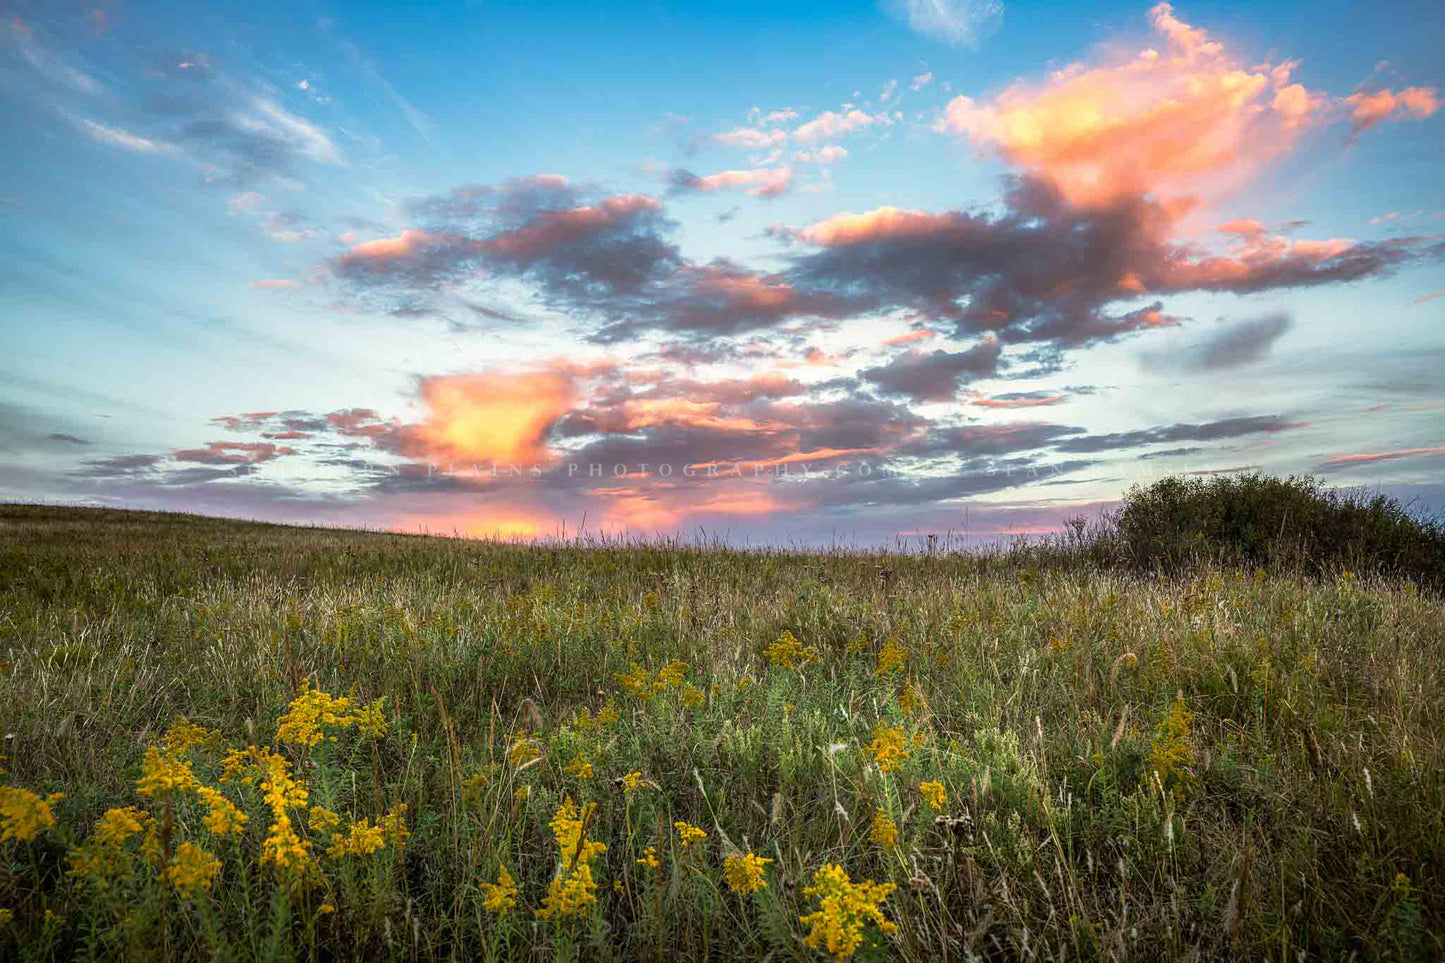 Landscape photography print of clouds illuminated by sunlight over the Tallgrass Prairie at sunset on an autumn evening in Osage County, Oklahoma by Sean Ramsey of Southern Plains Photography.